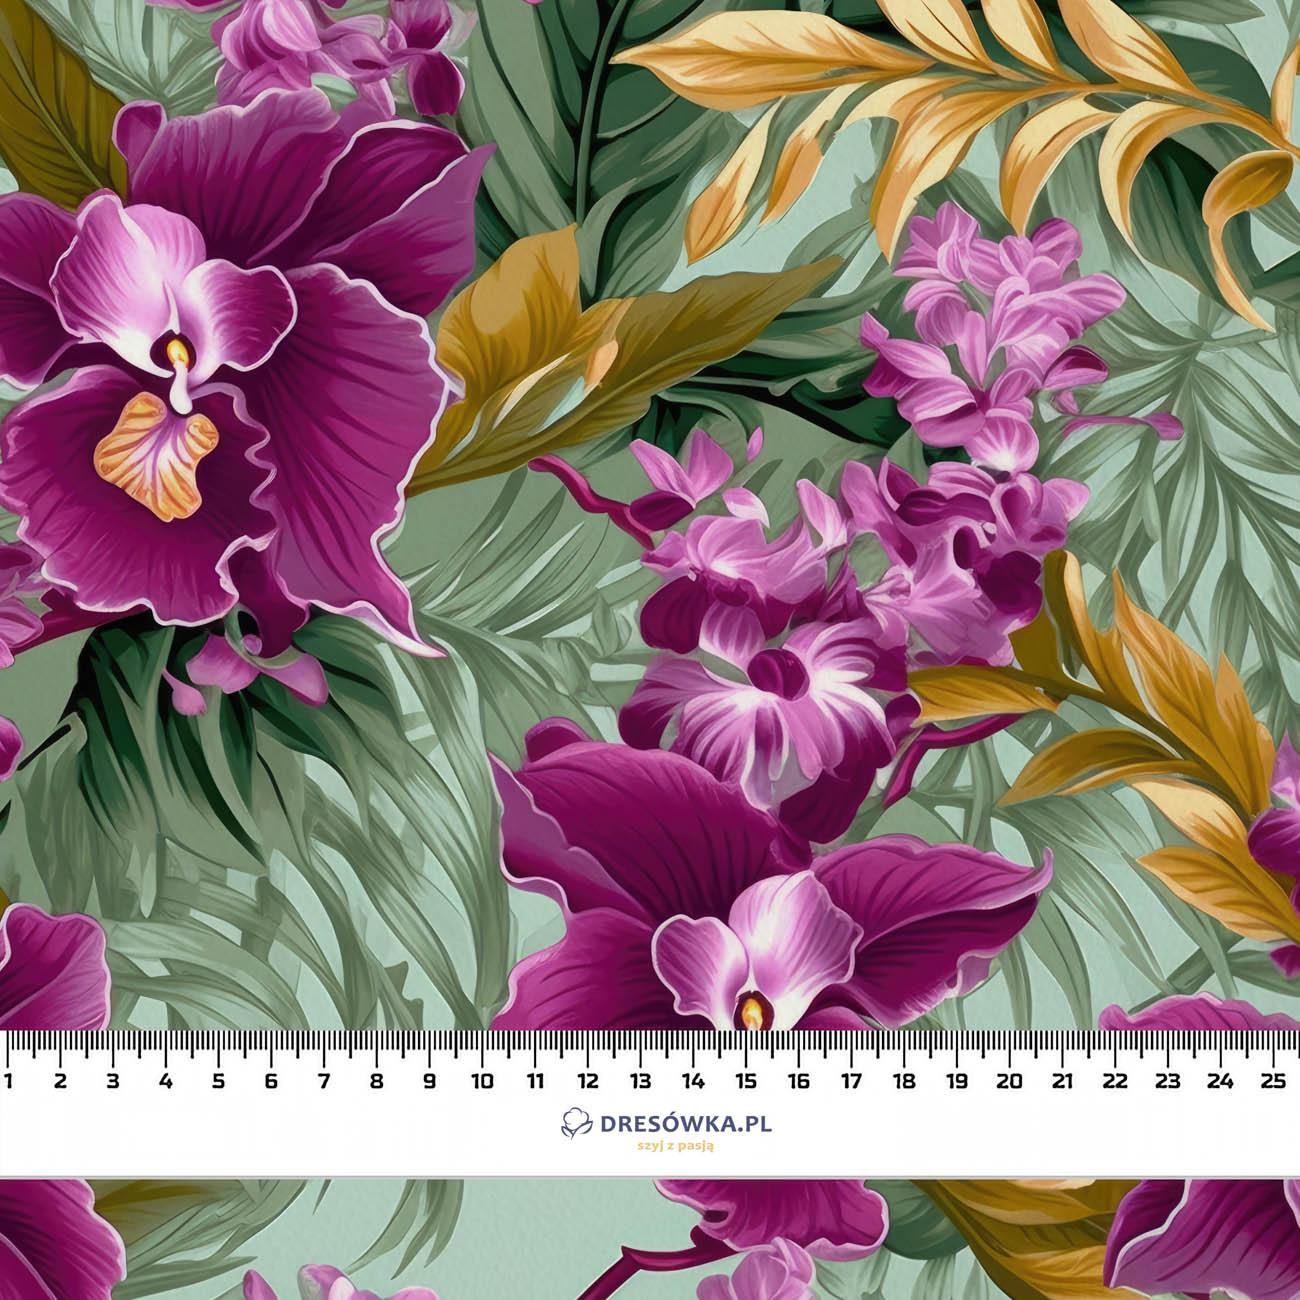 EXOTIC ORCHIDS PAT. 3 - quick-drying woven fabric